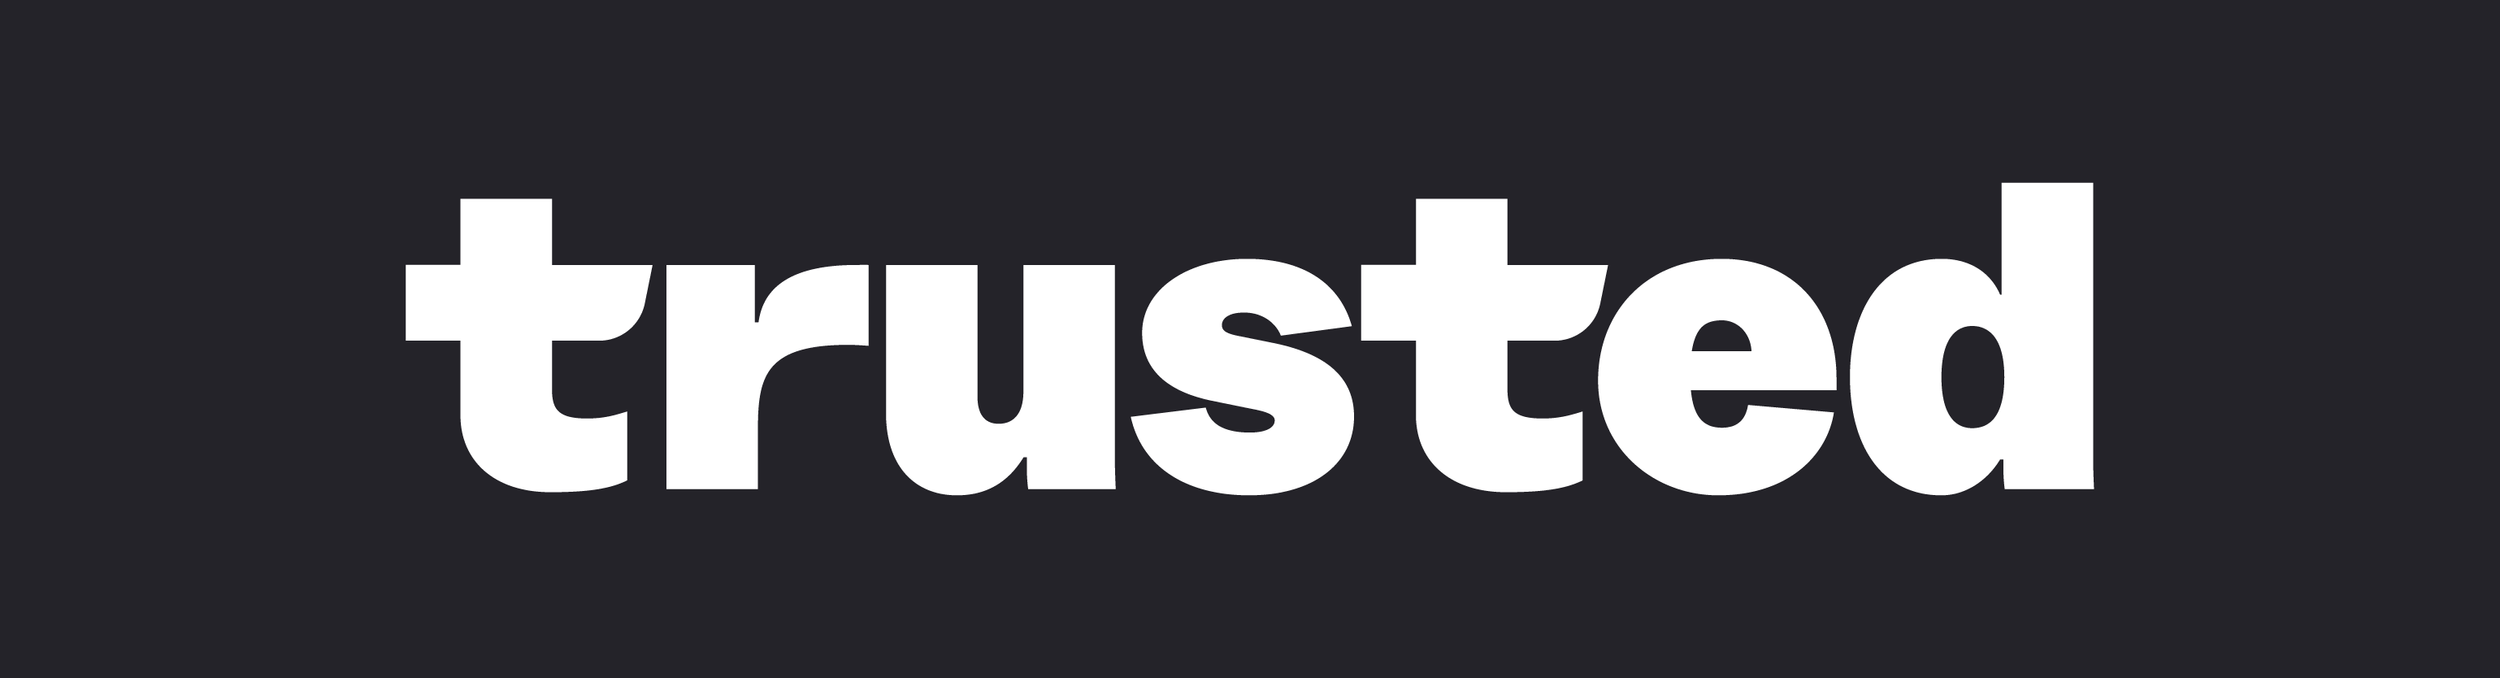 trusted logo.png